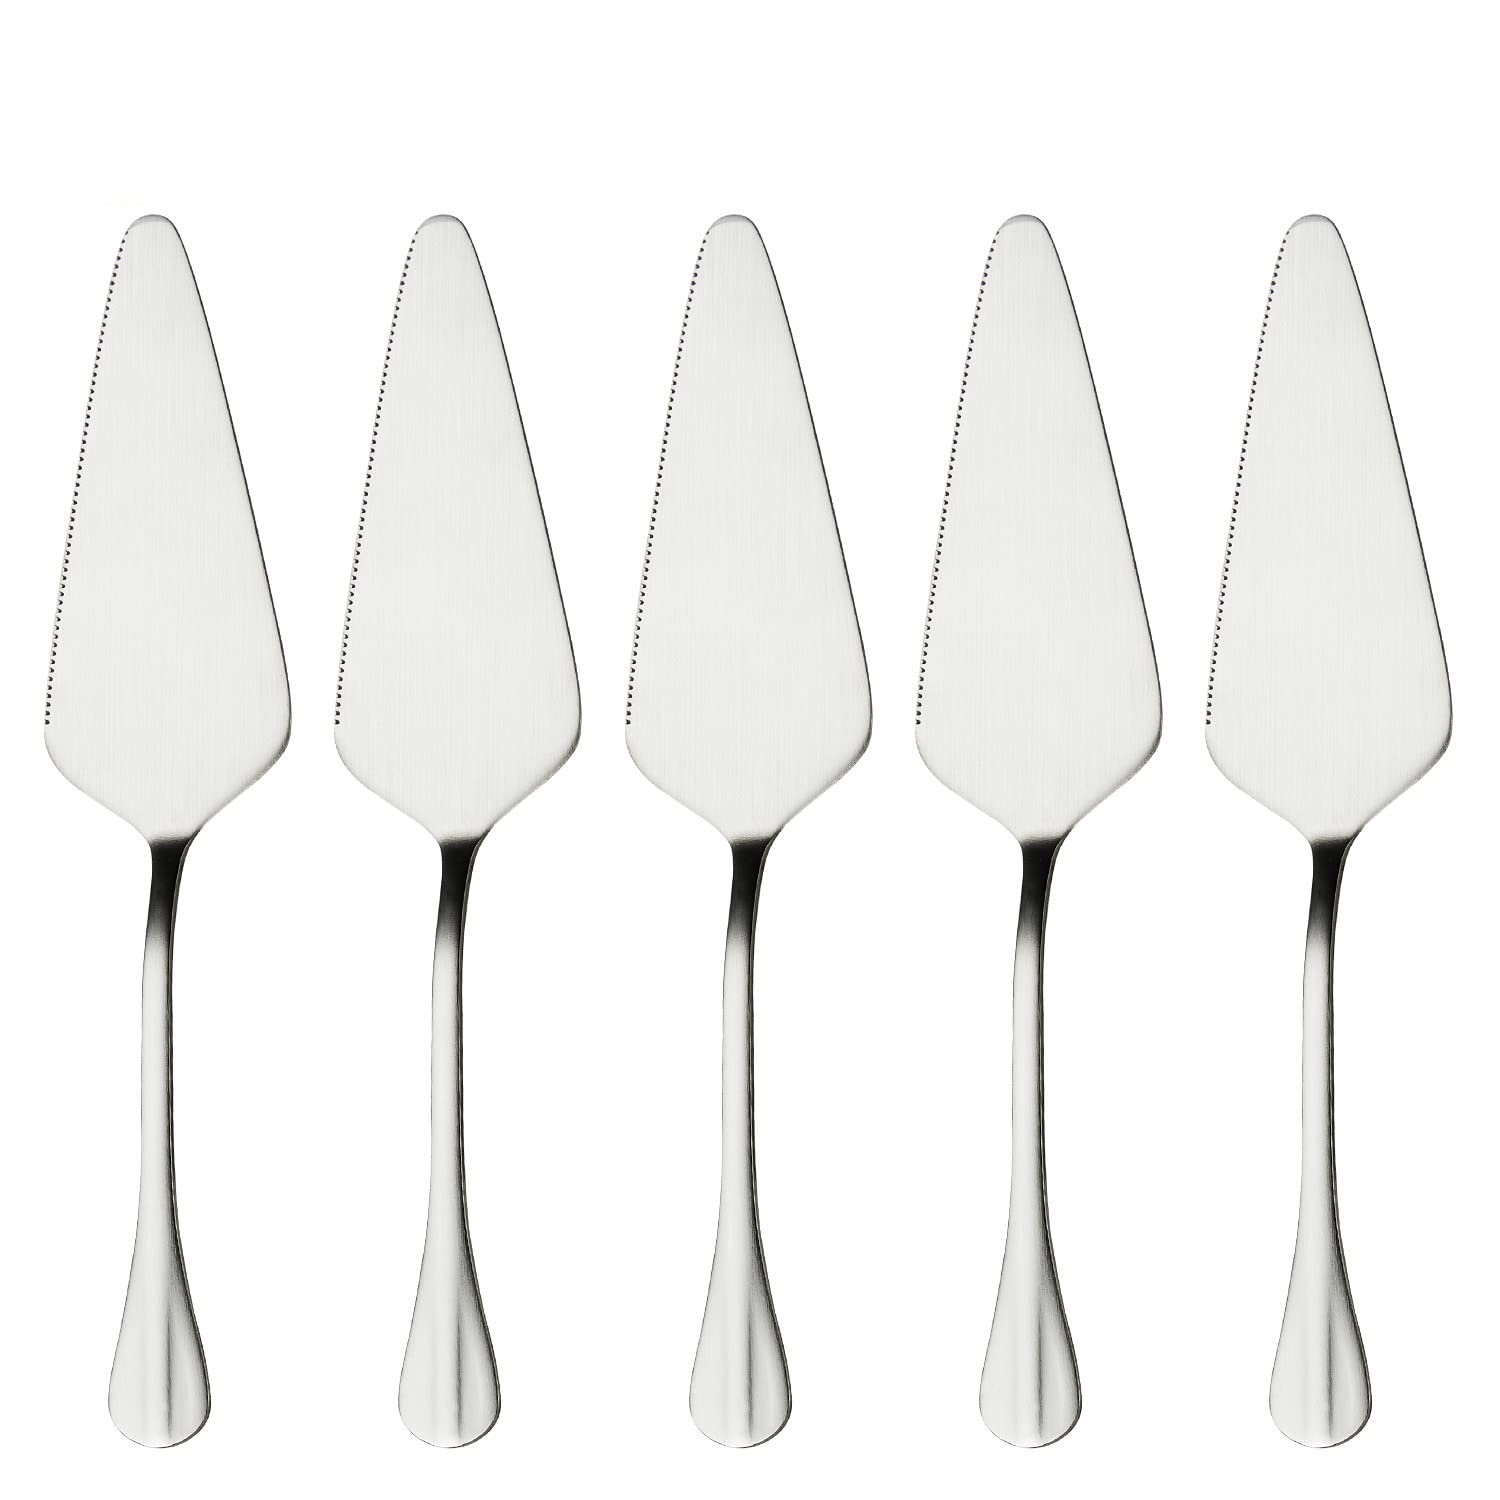 Pie Server Stainless Steel, HOFTEN Cake Pie Pastry Server Set of 5, Professional Dessert Server For Cake Cheese Pie Pizza and more, Serrated Cake Knife （8.93inch Length)